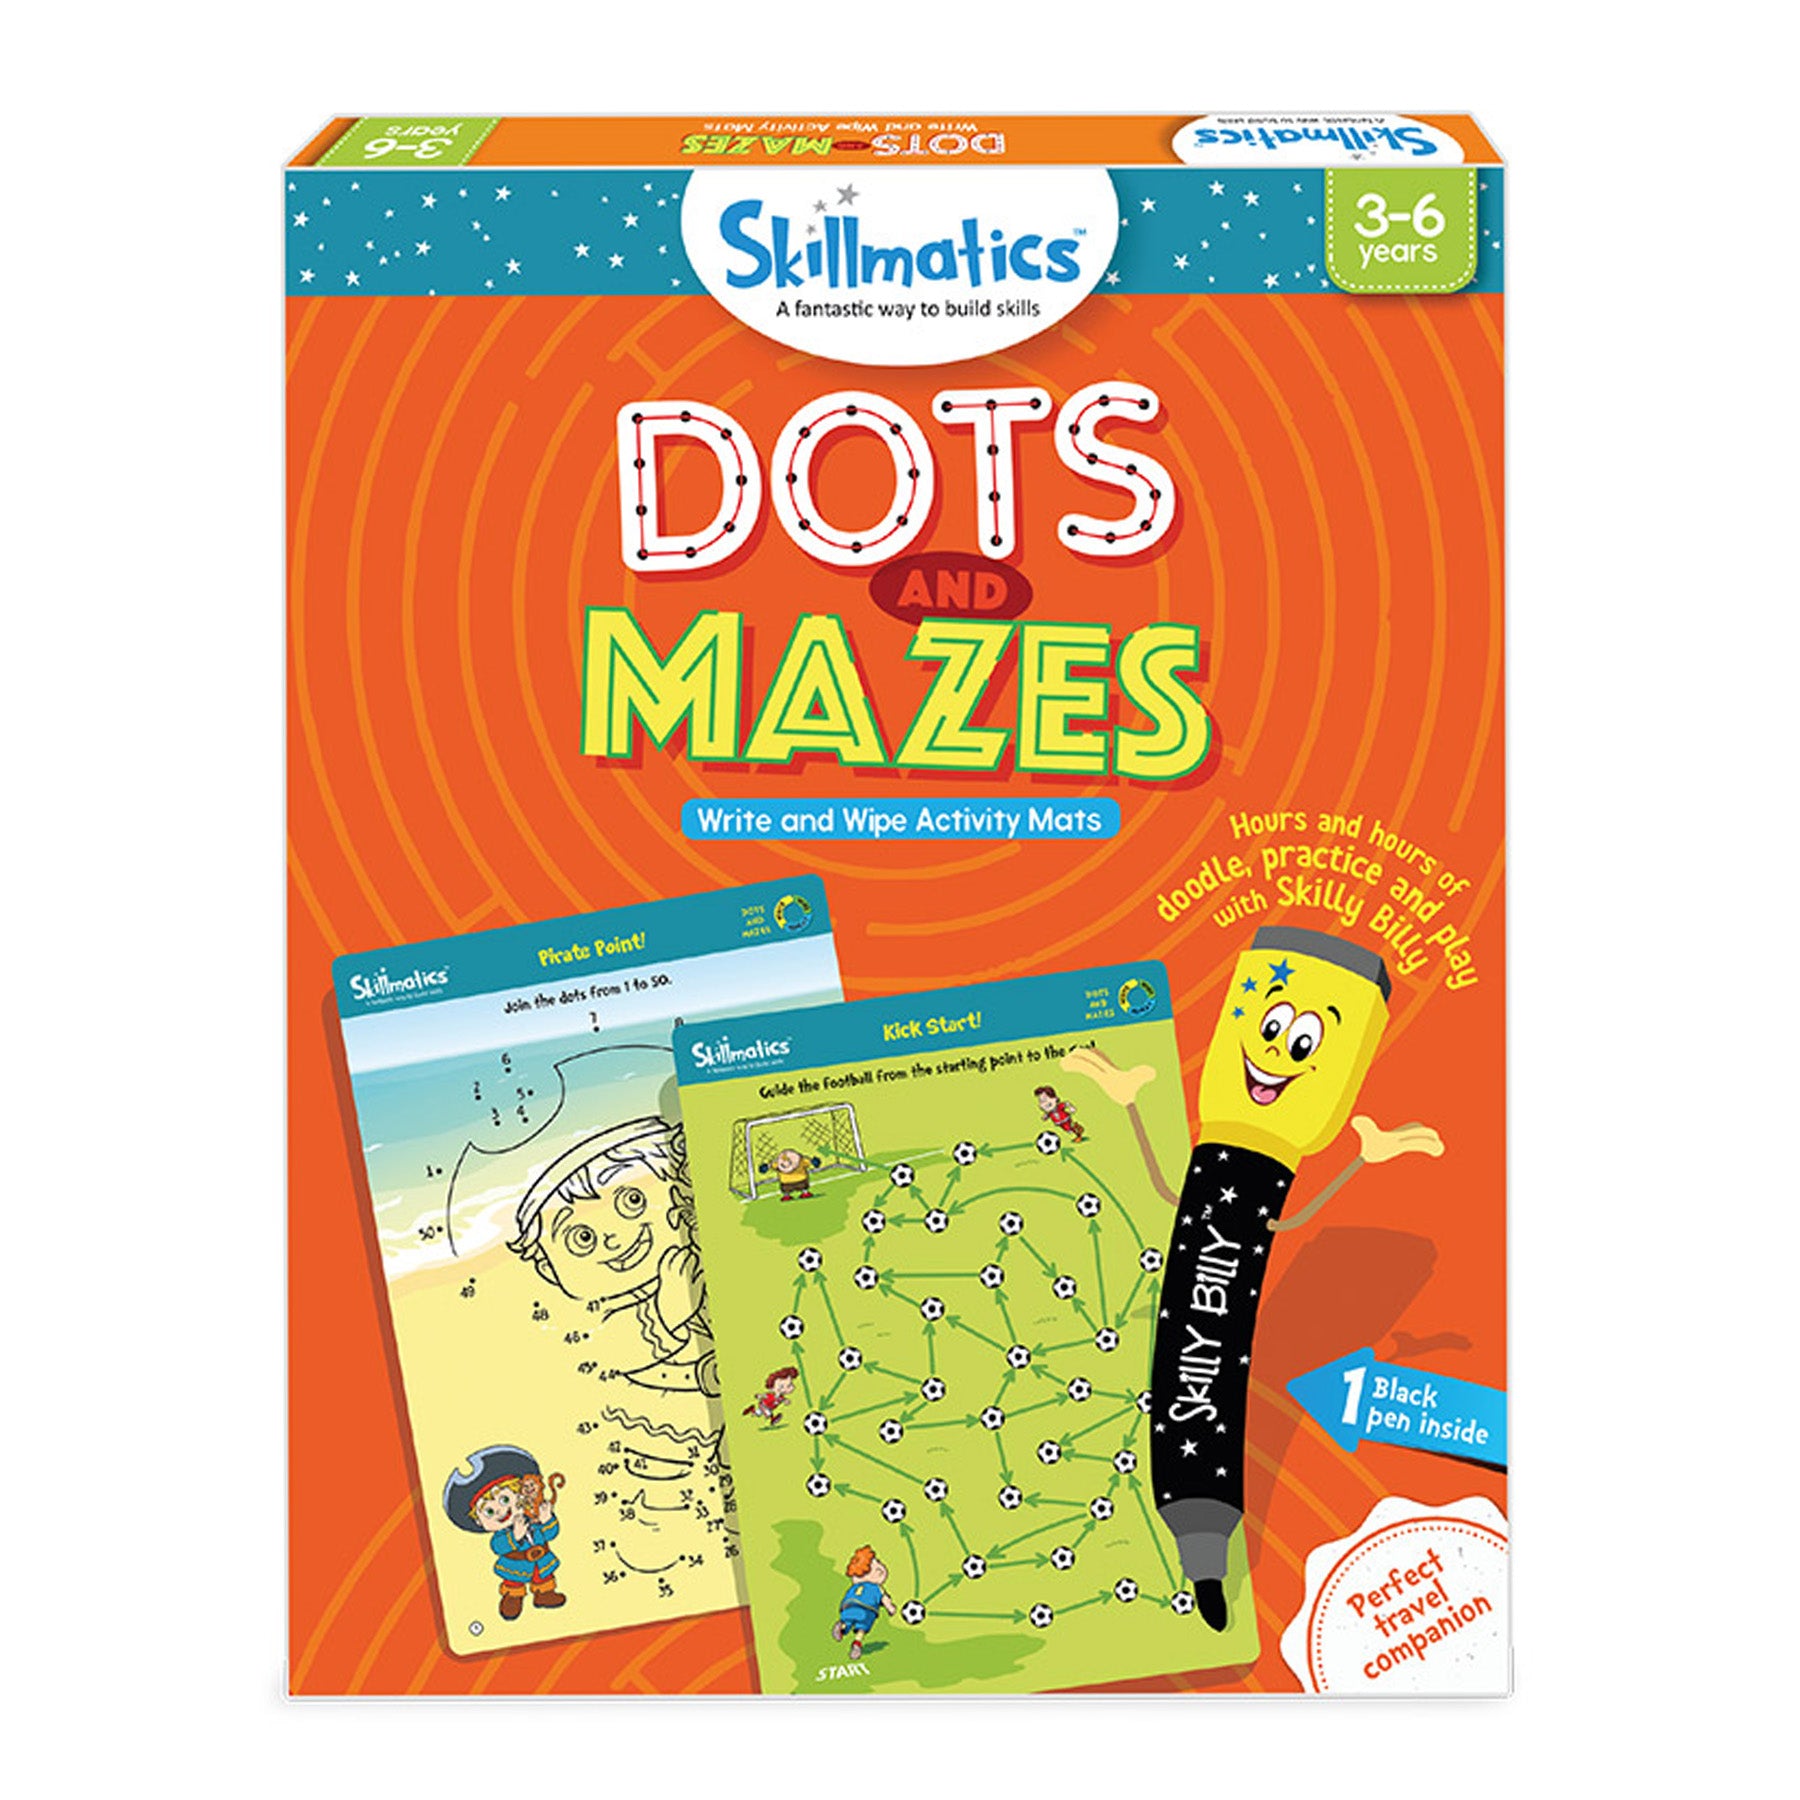 Dots and Mazes game